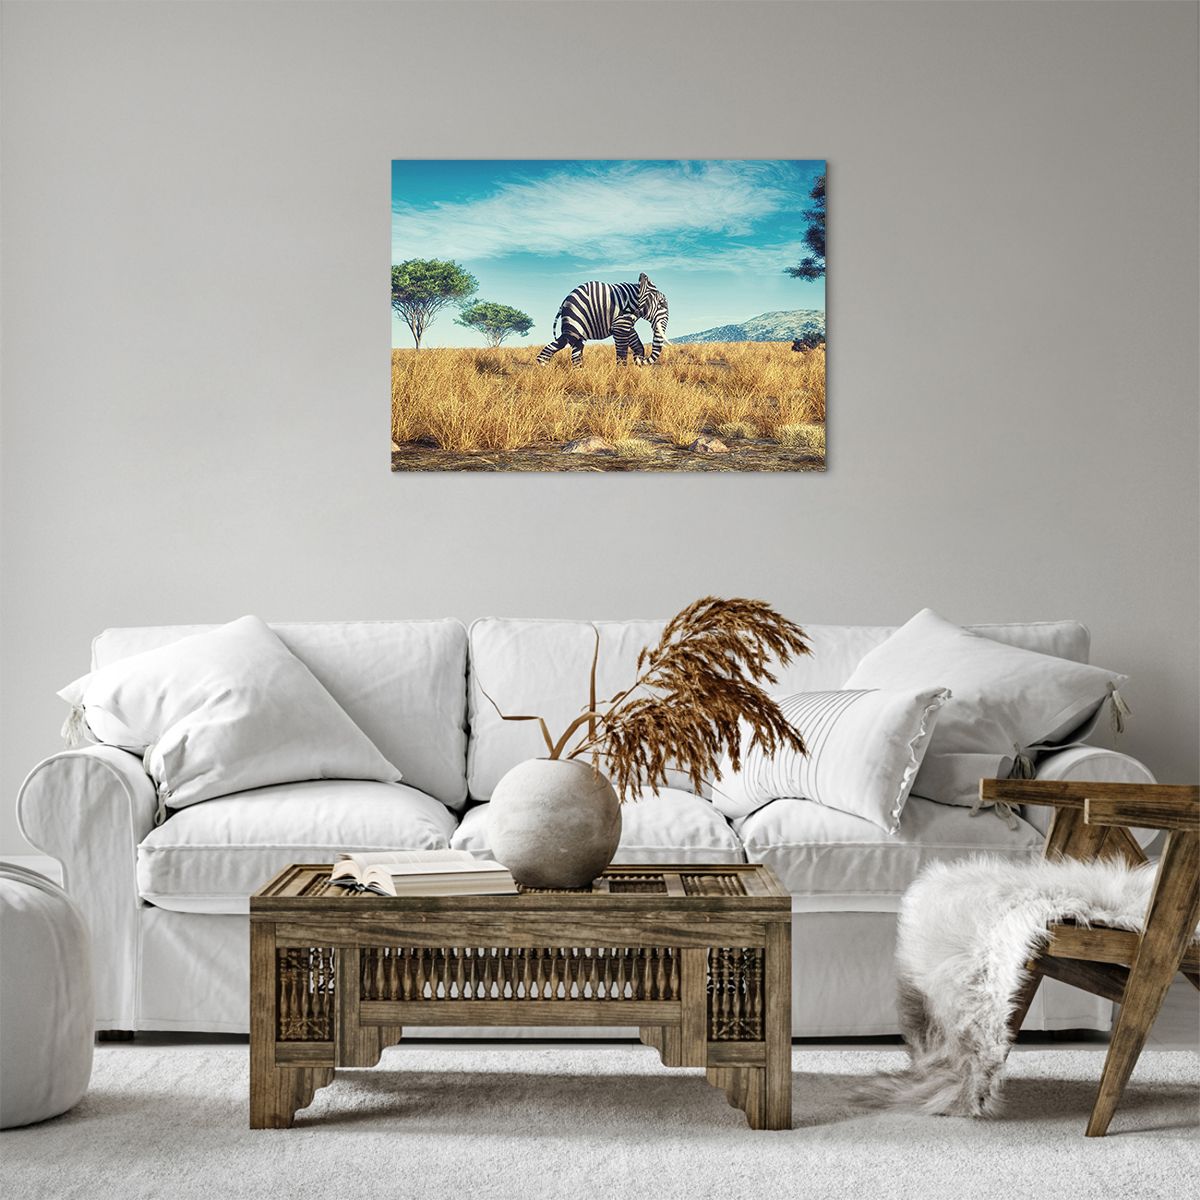 Impression sur toile Abstraction, Impression sur toile Éléphant, Impression sur toile Côtes, Impression sur toile Paysage, Impression sur toile Afrique